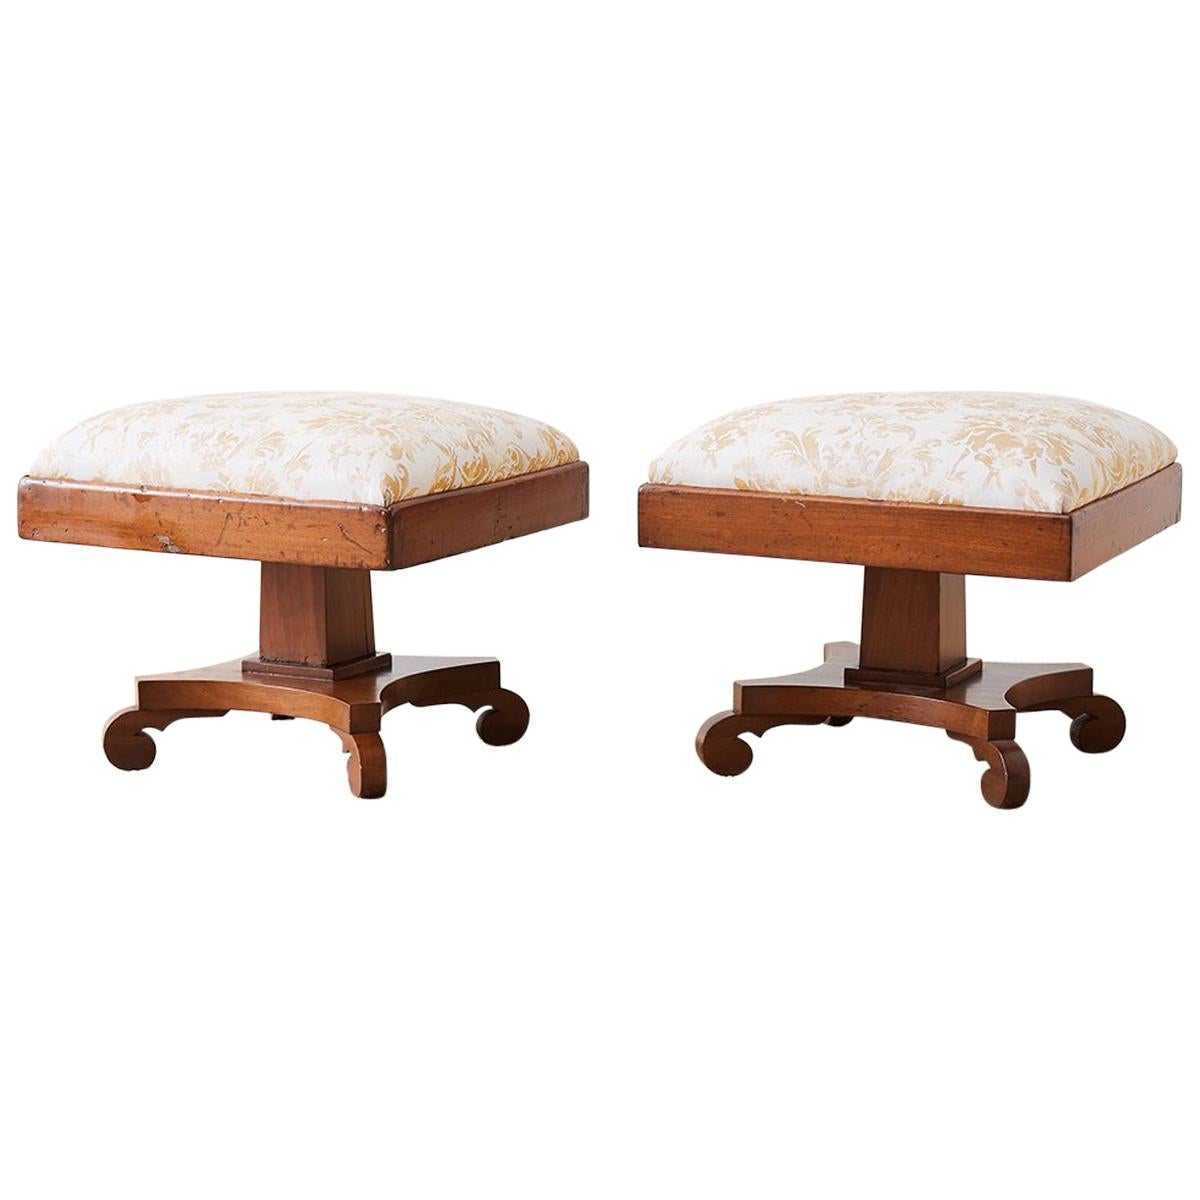 Pair of Biedermeier Carved Footstools with Fortuny Upholstery